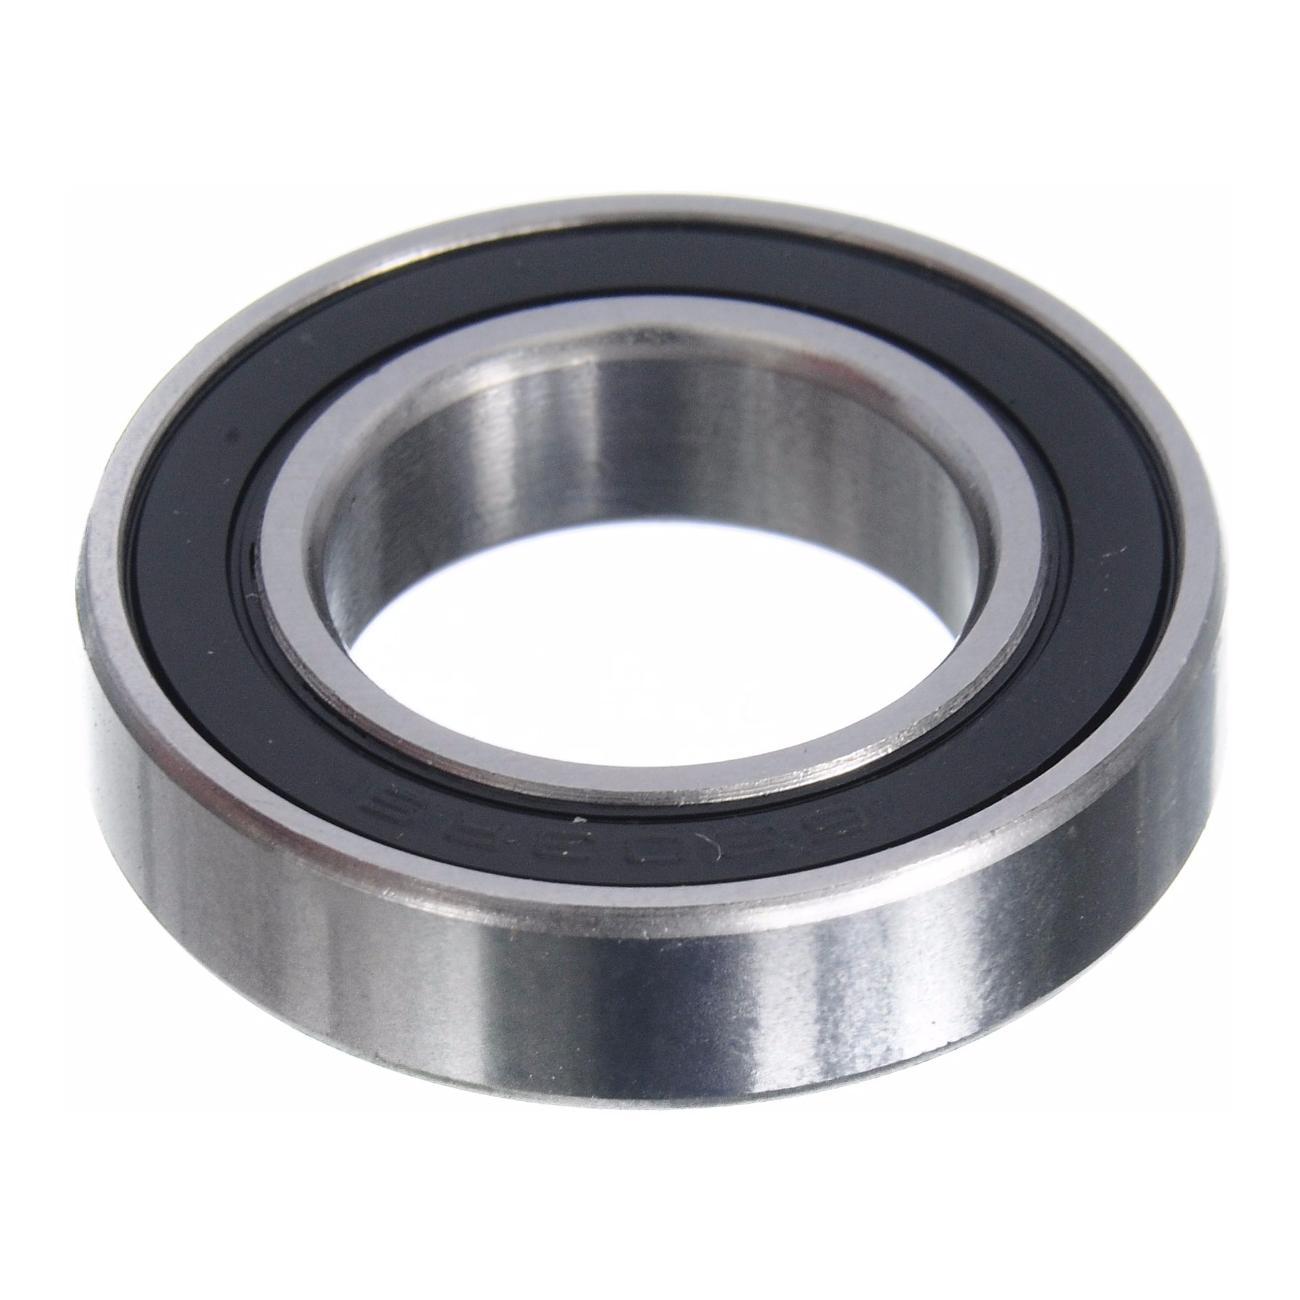 Brand-x Sealed Bearing - 6903 (2rs) - Silver